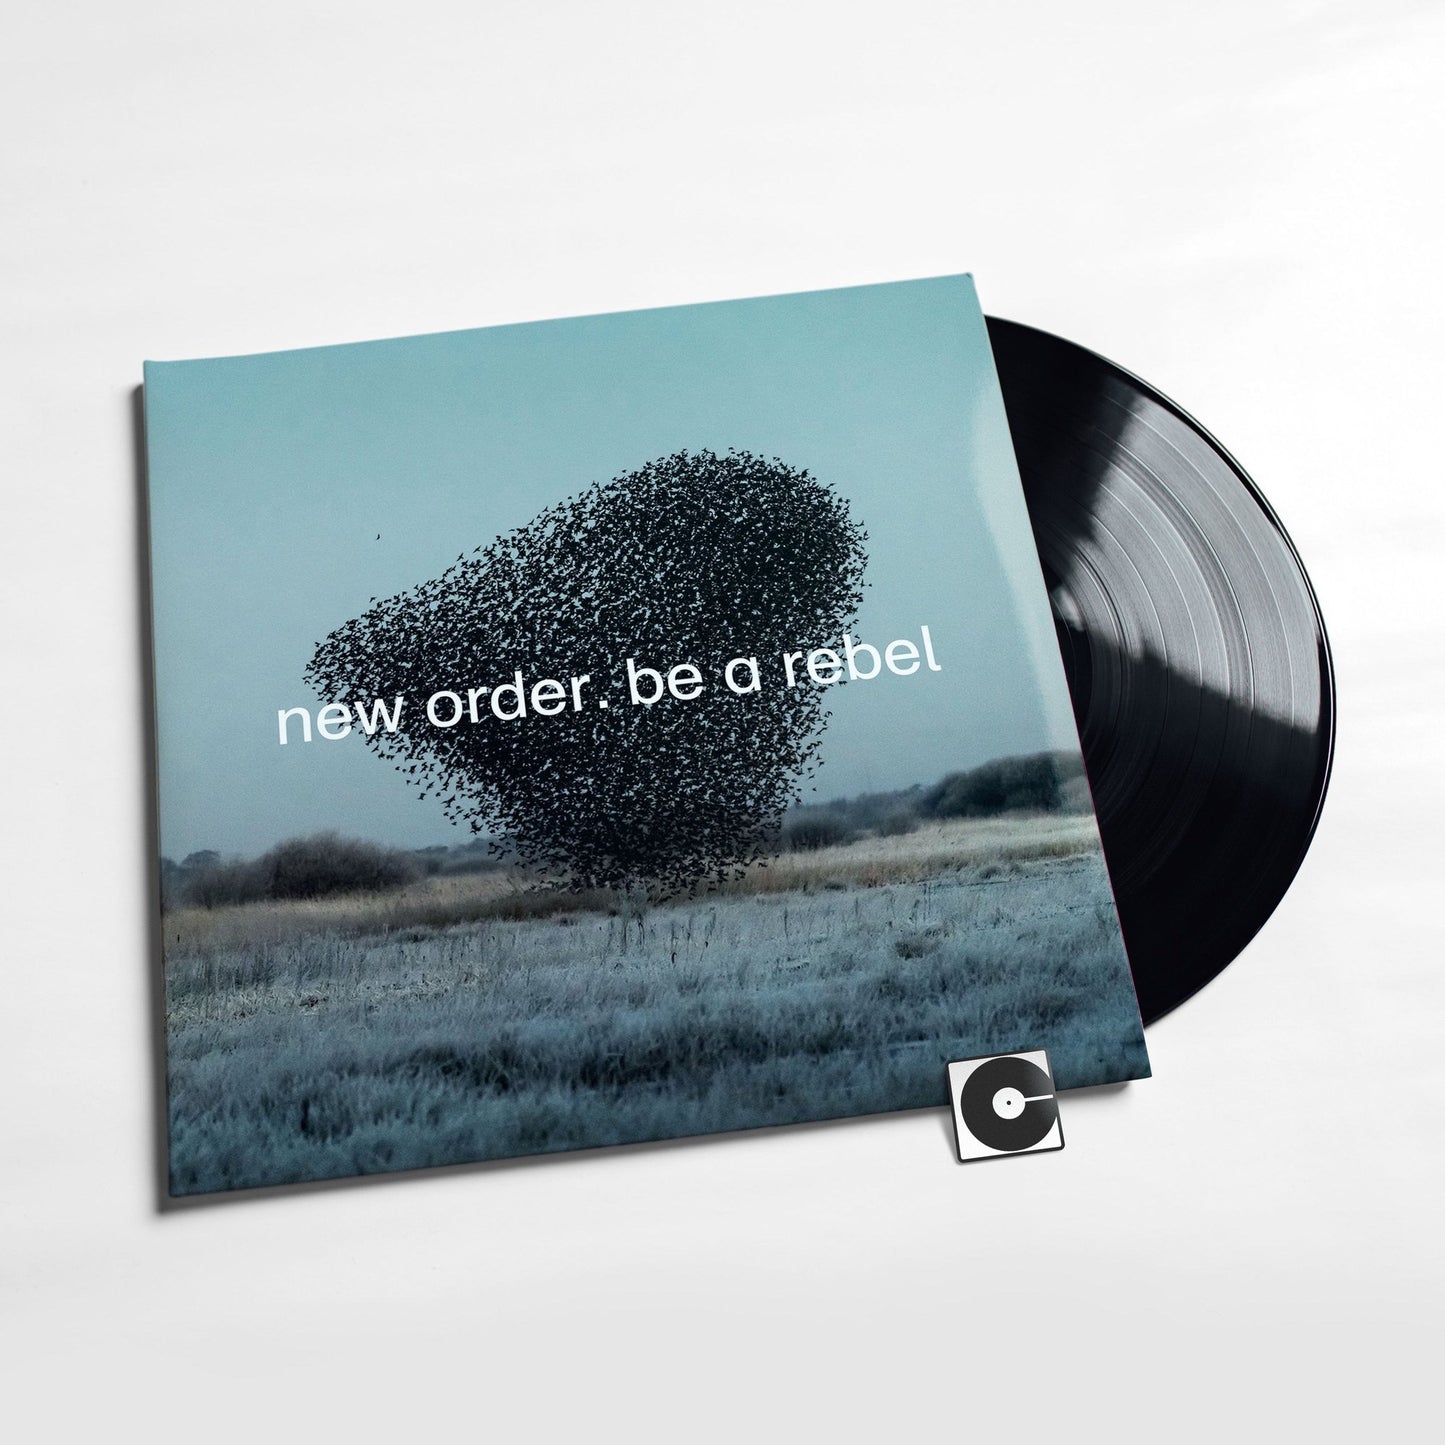 New Order - "Be A Rebel"